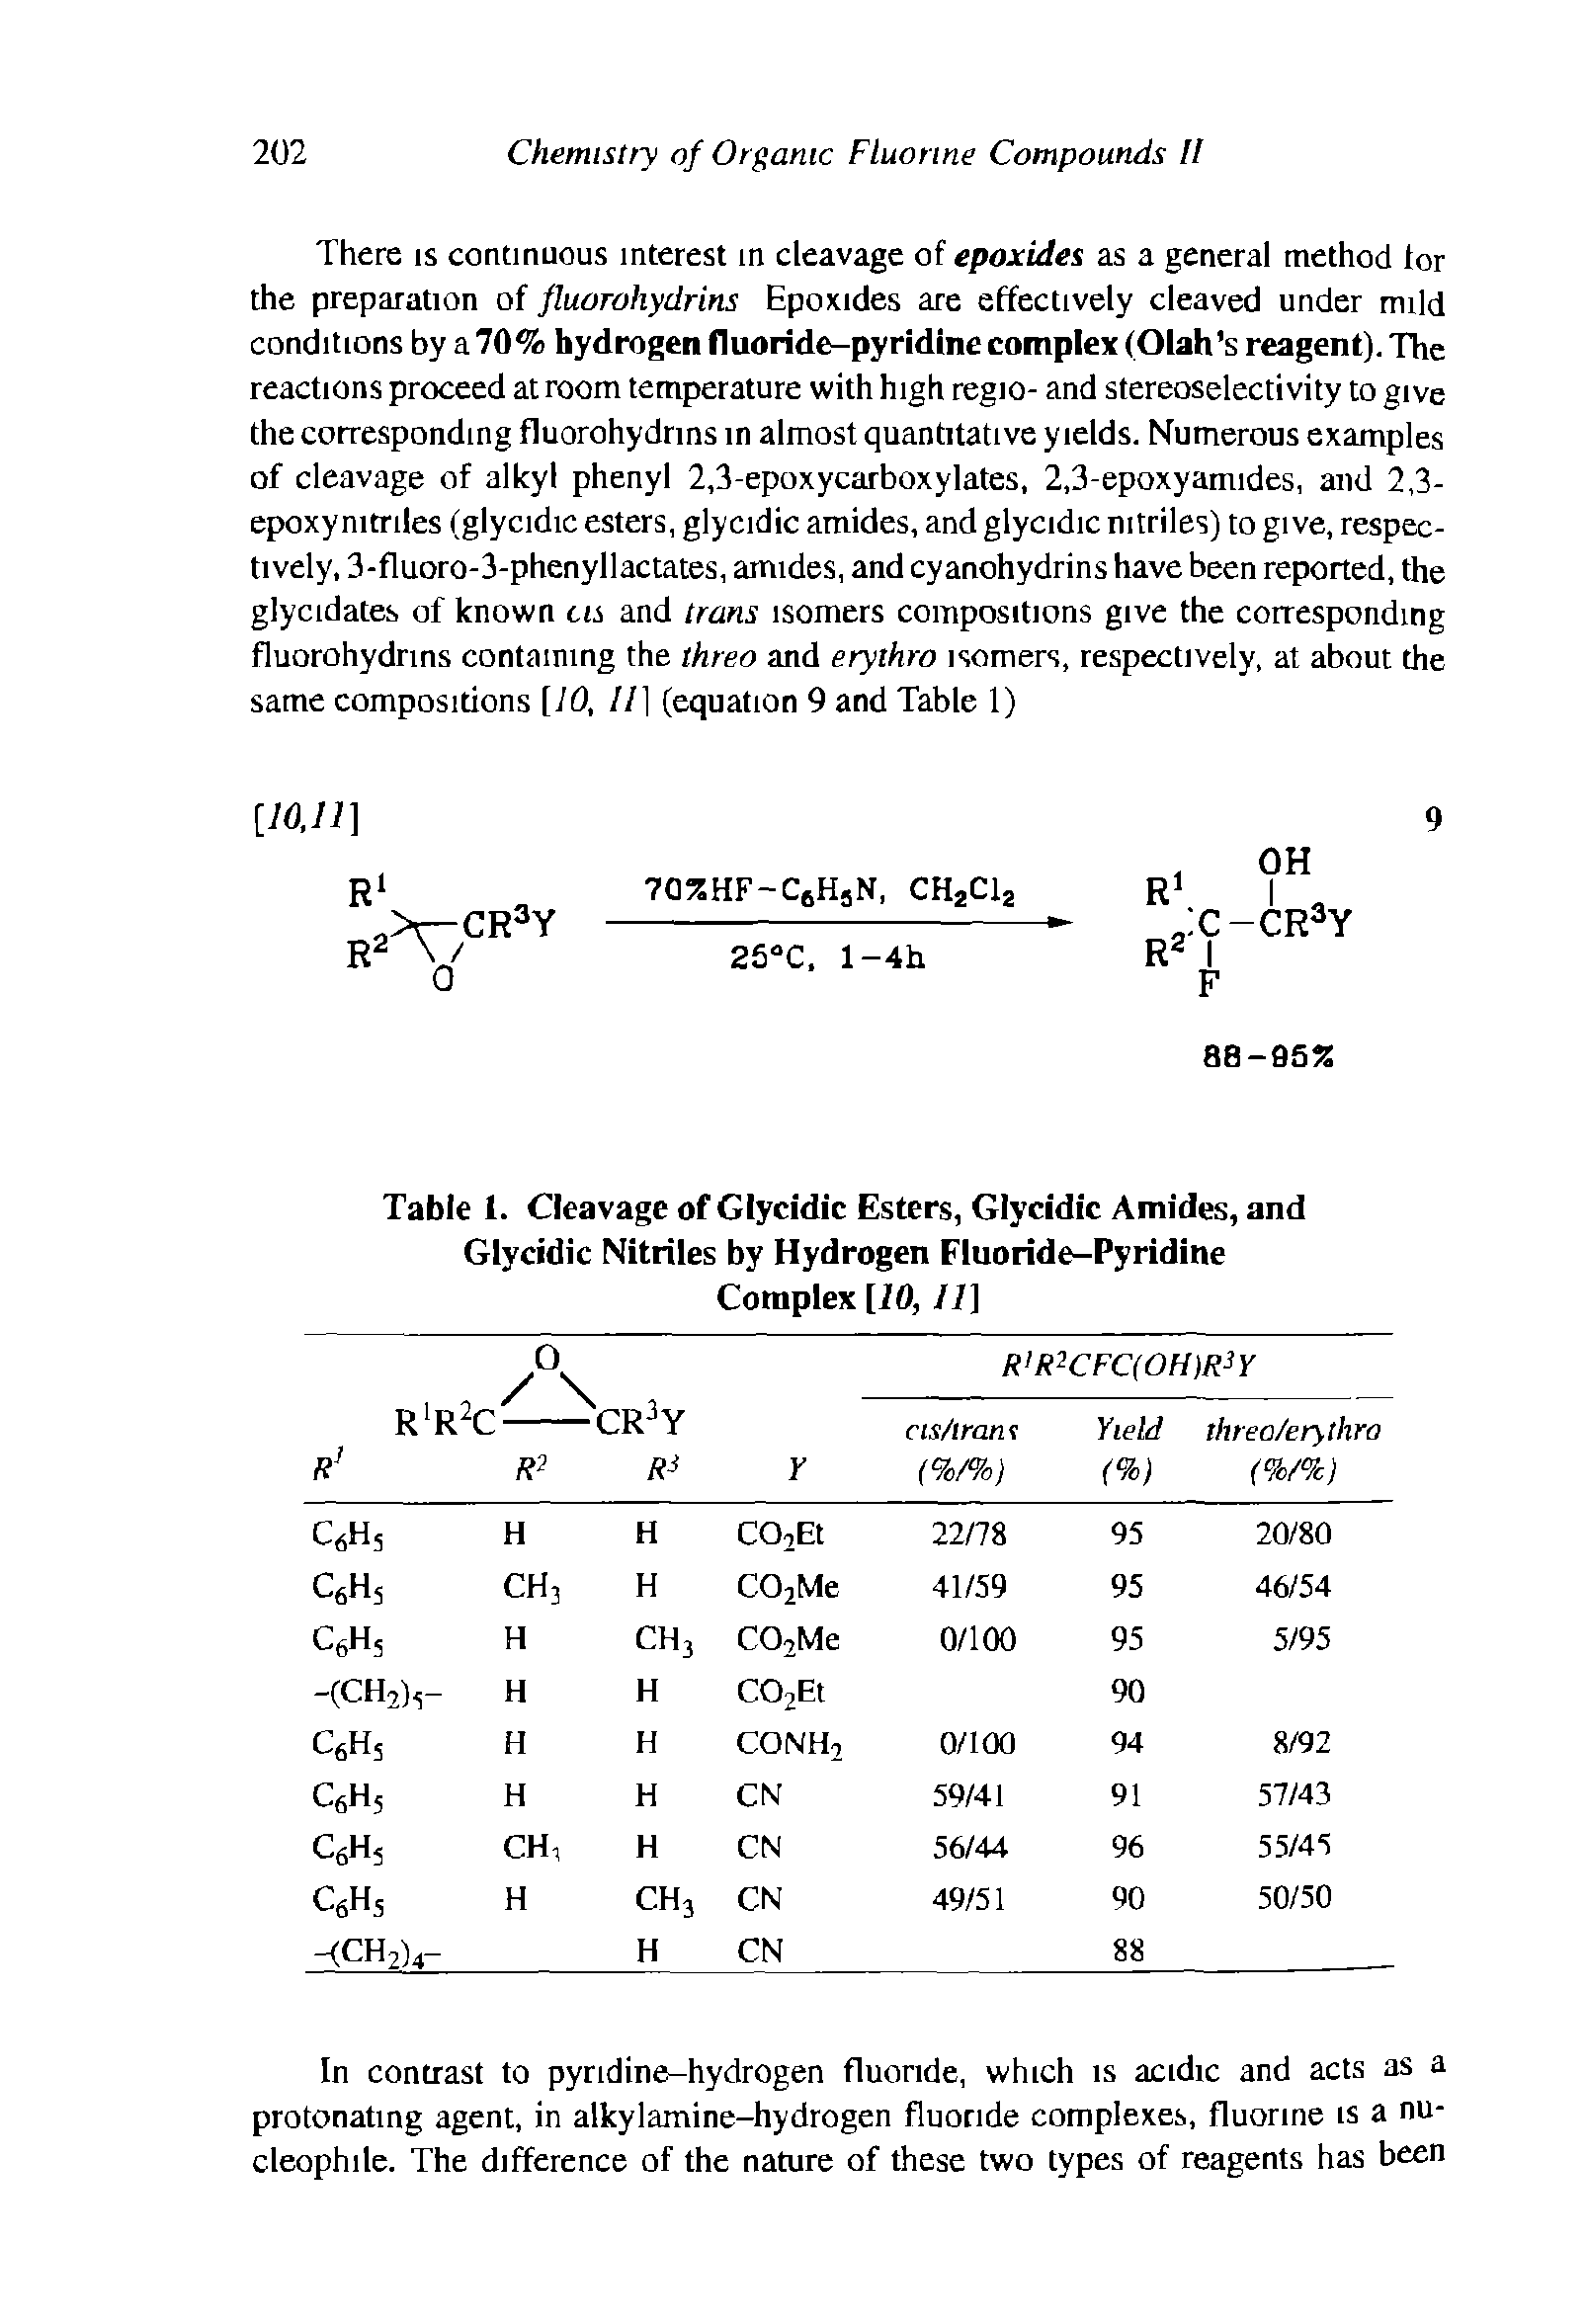 Table 1. Cleavage of Glycidic Esters, Glycidic Amides, and Glycidic Nitriles by Hydrogen Fluoride-Pyridine Complex 110,11]...